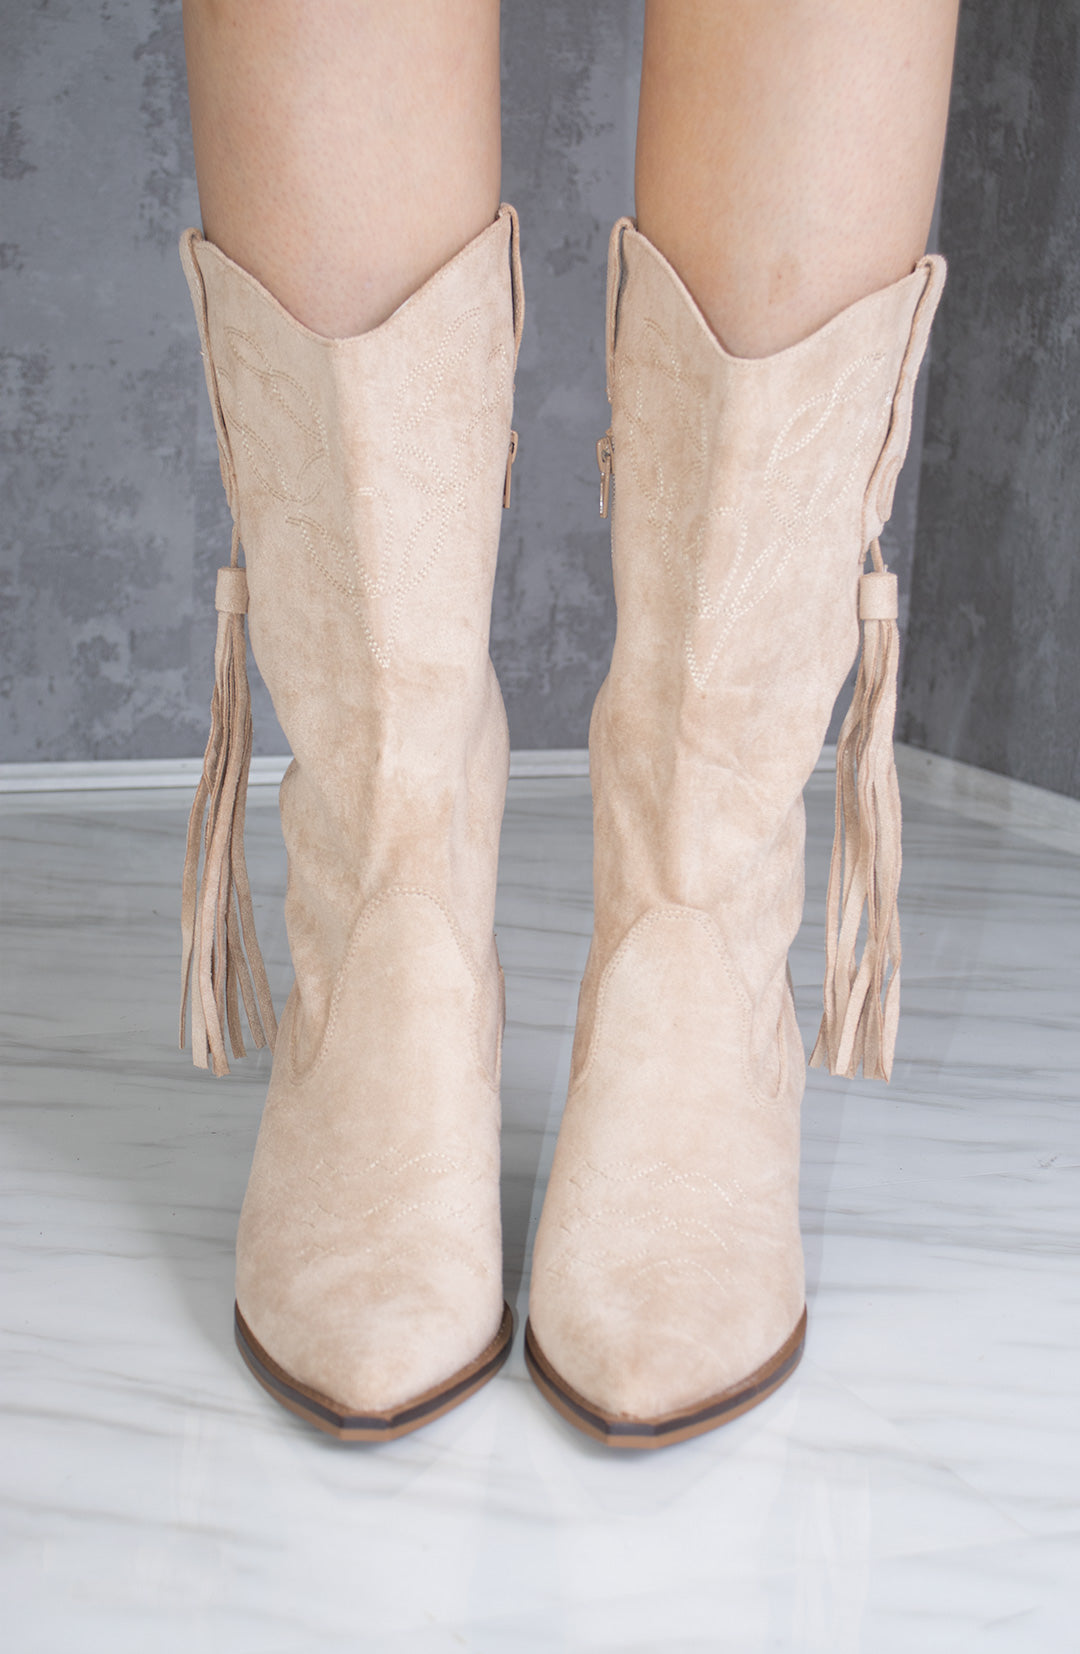 Load image into Gallery viewer, Beige Calf Length Faux Suede Tassel Cowboy Boot
